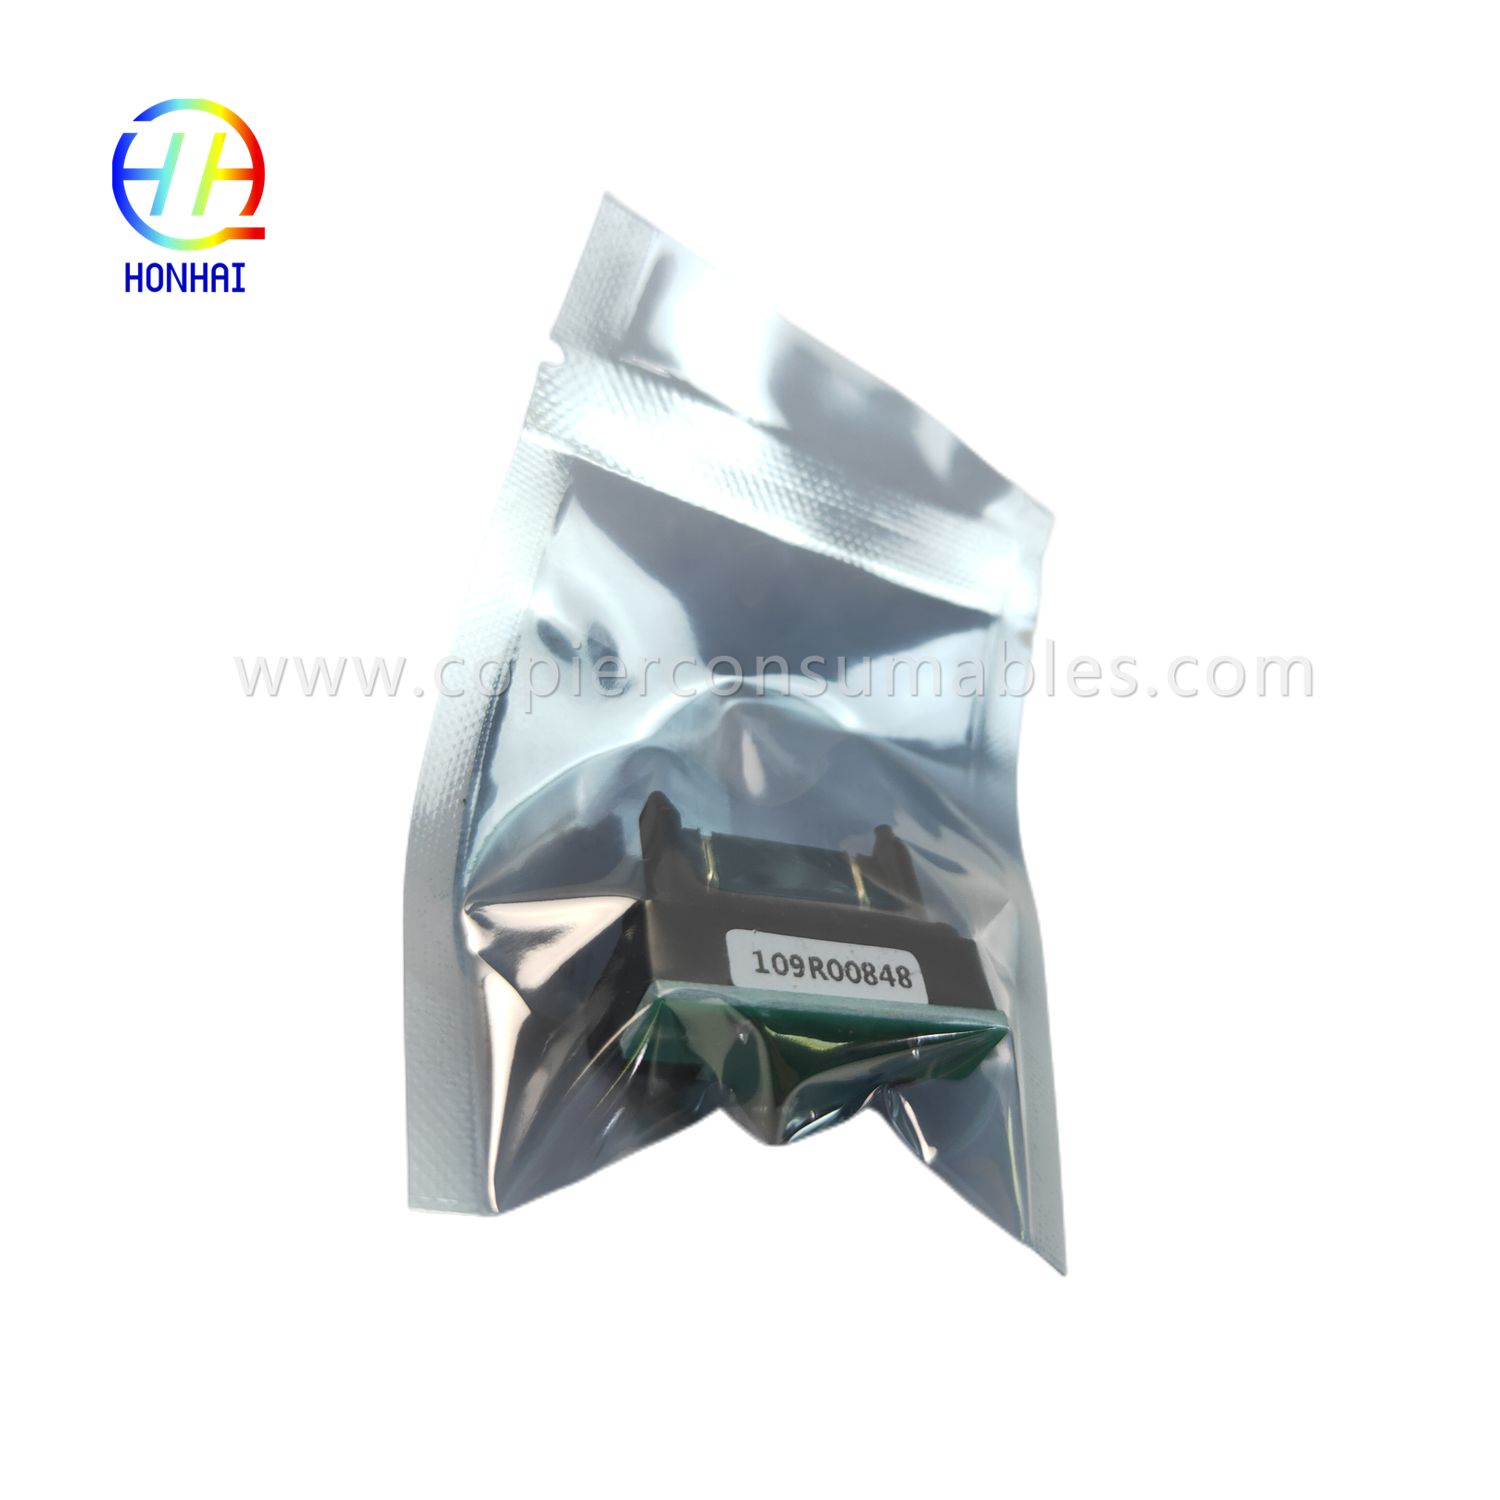 Chip fusor para xerox workcentre 5945 5955 109R00848 chip (5)_副本